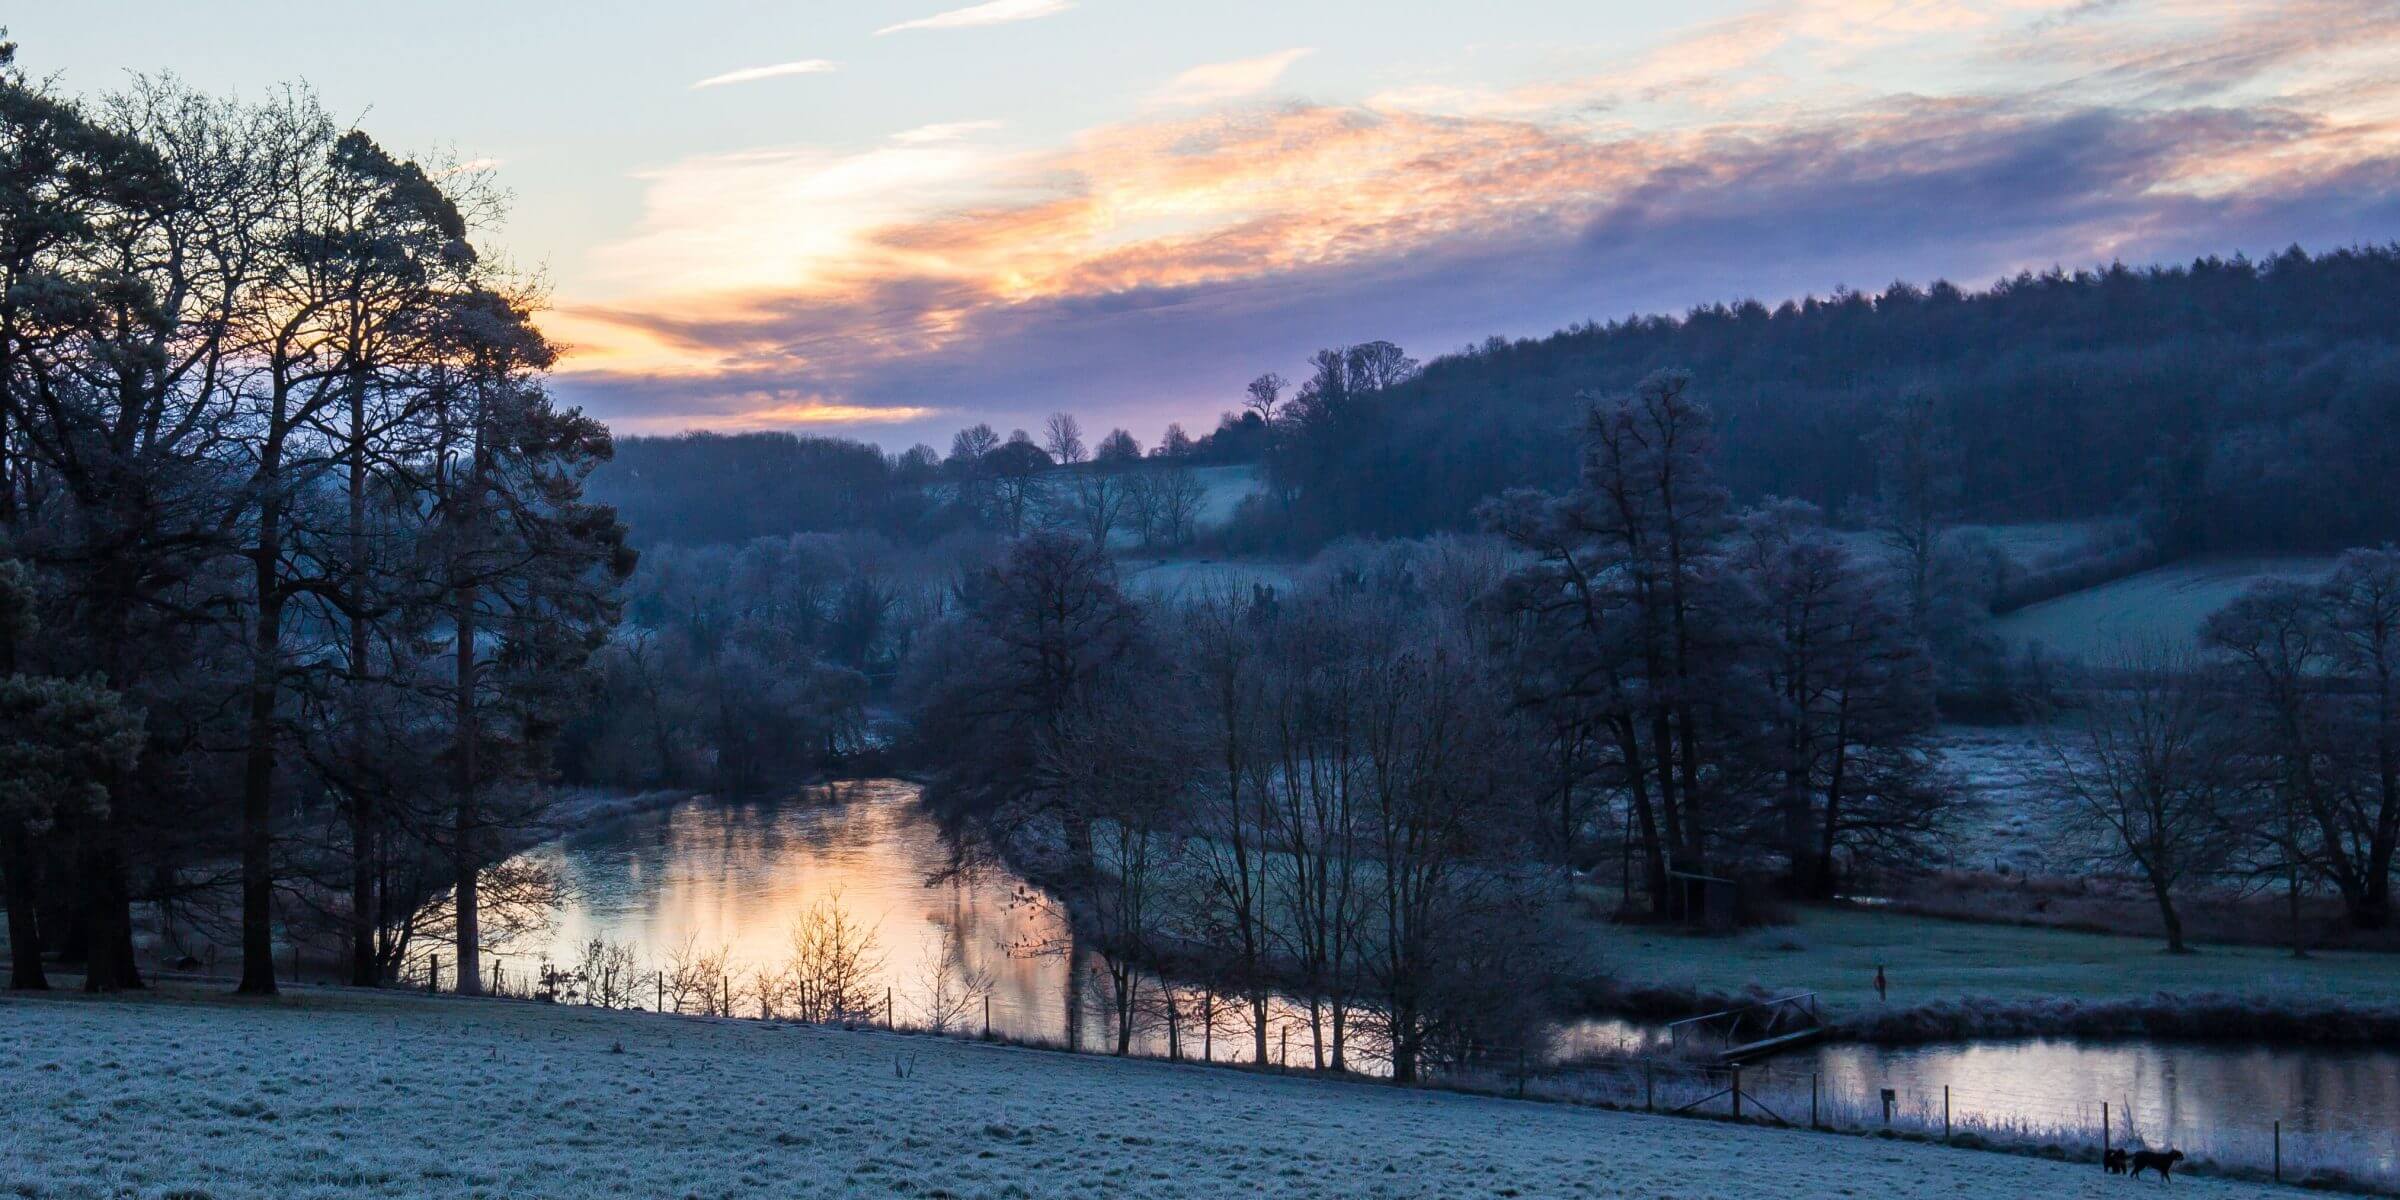 Winter sunrise latimer chess valley credit Colin Drake. Chilterns landscape character River Valleys